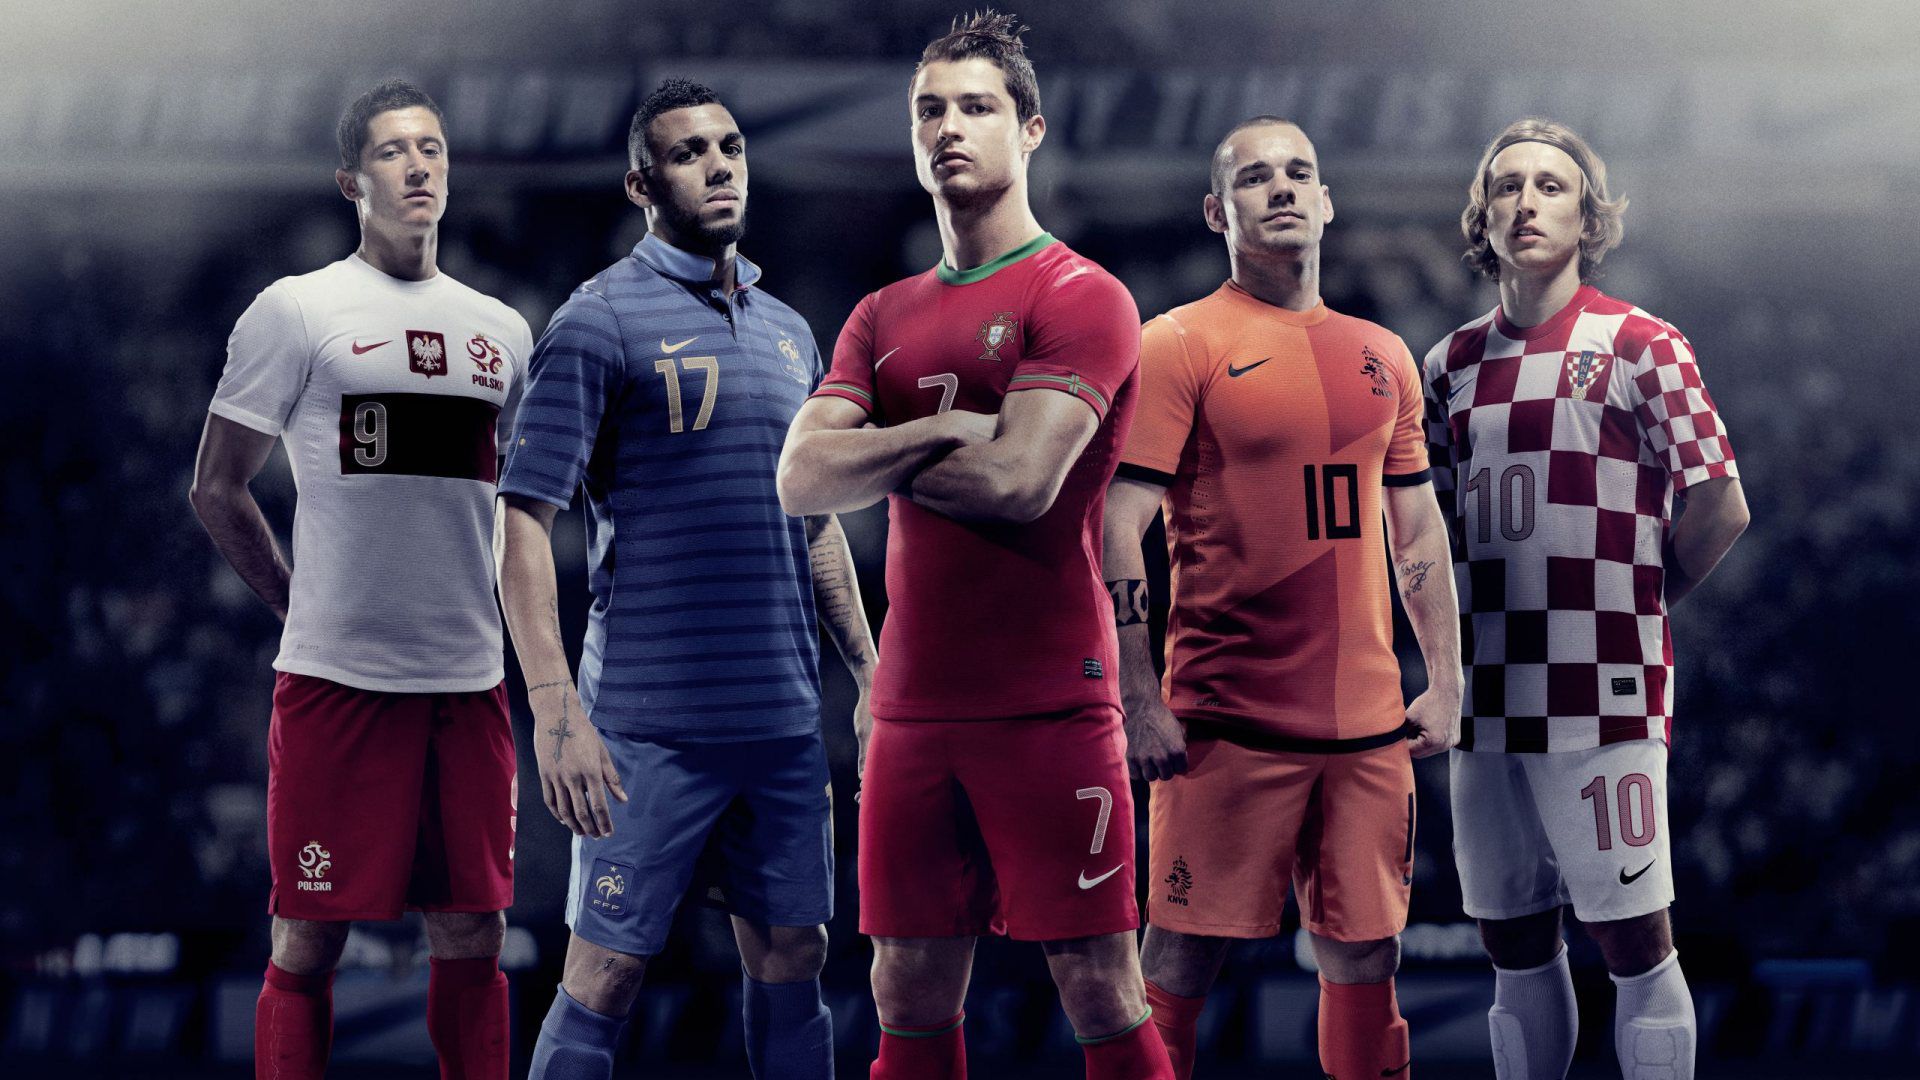 Euro Full High Definition Wallpaper Football Players P Your Top HD ...